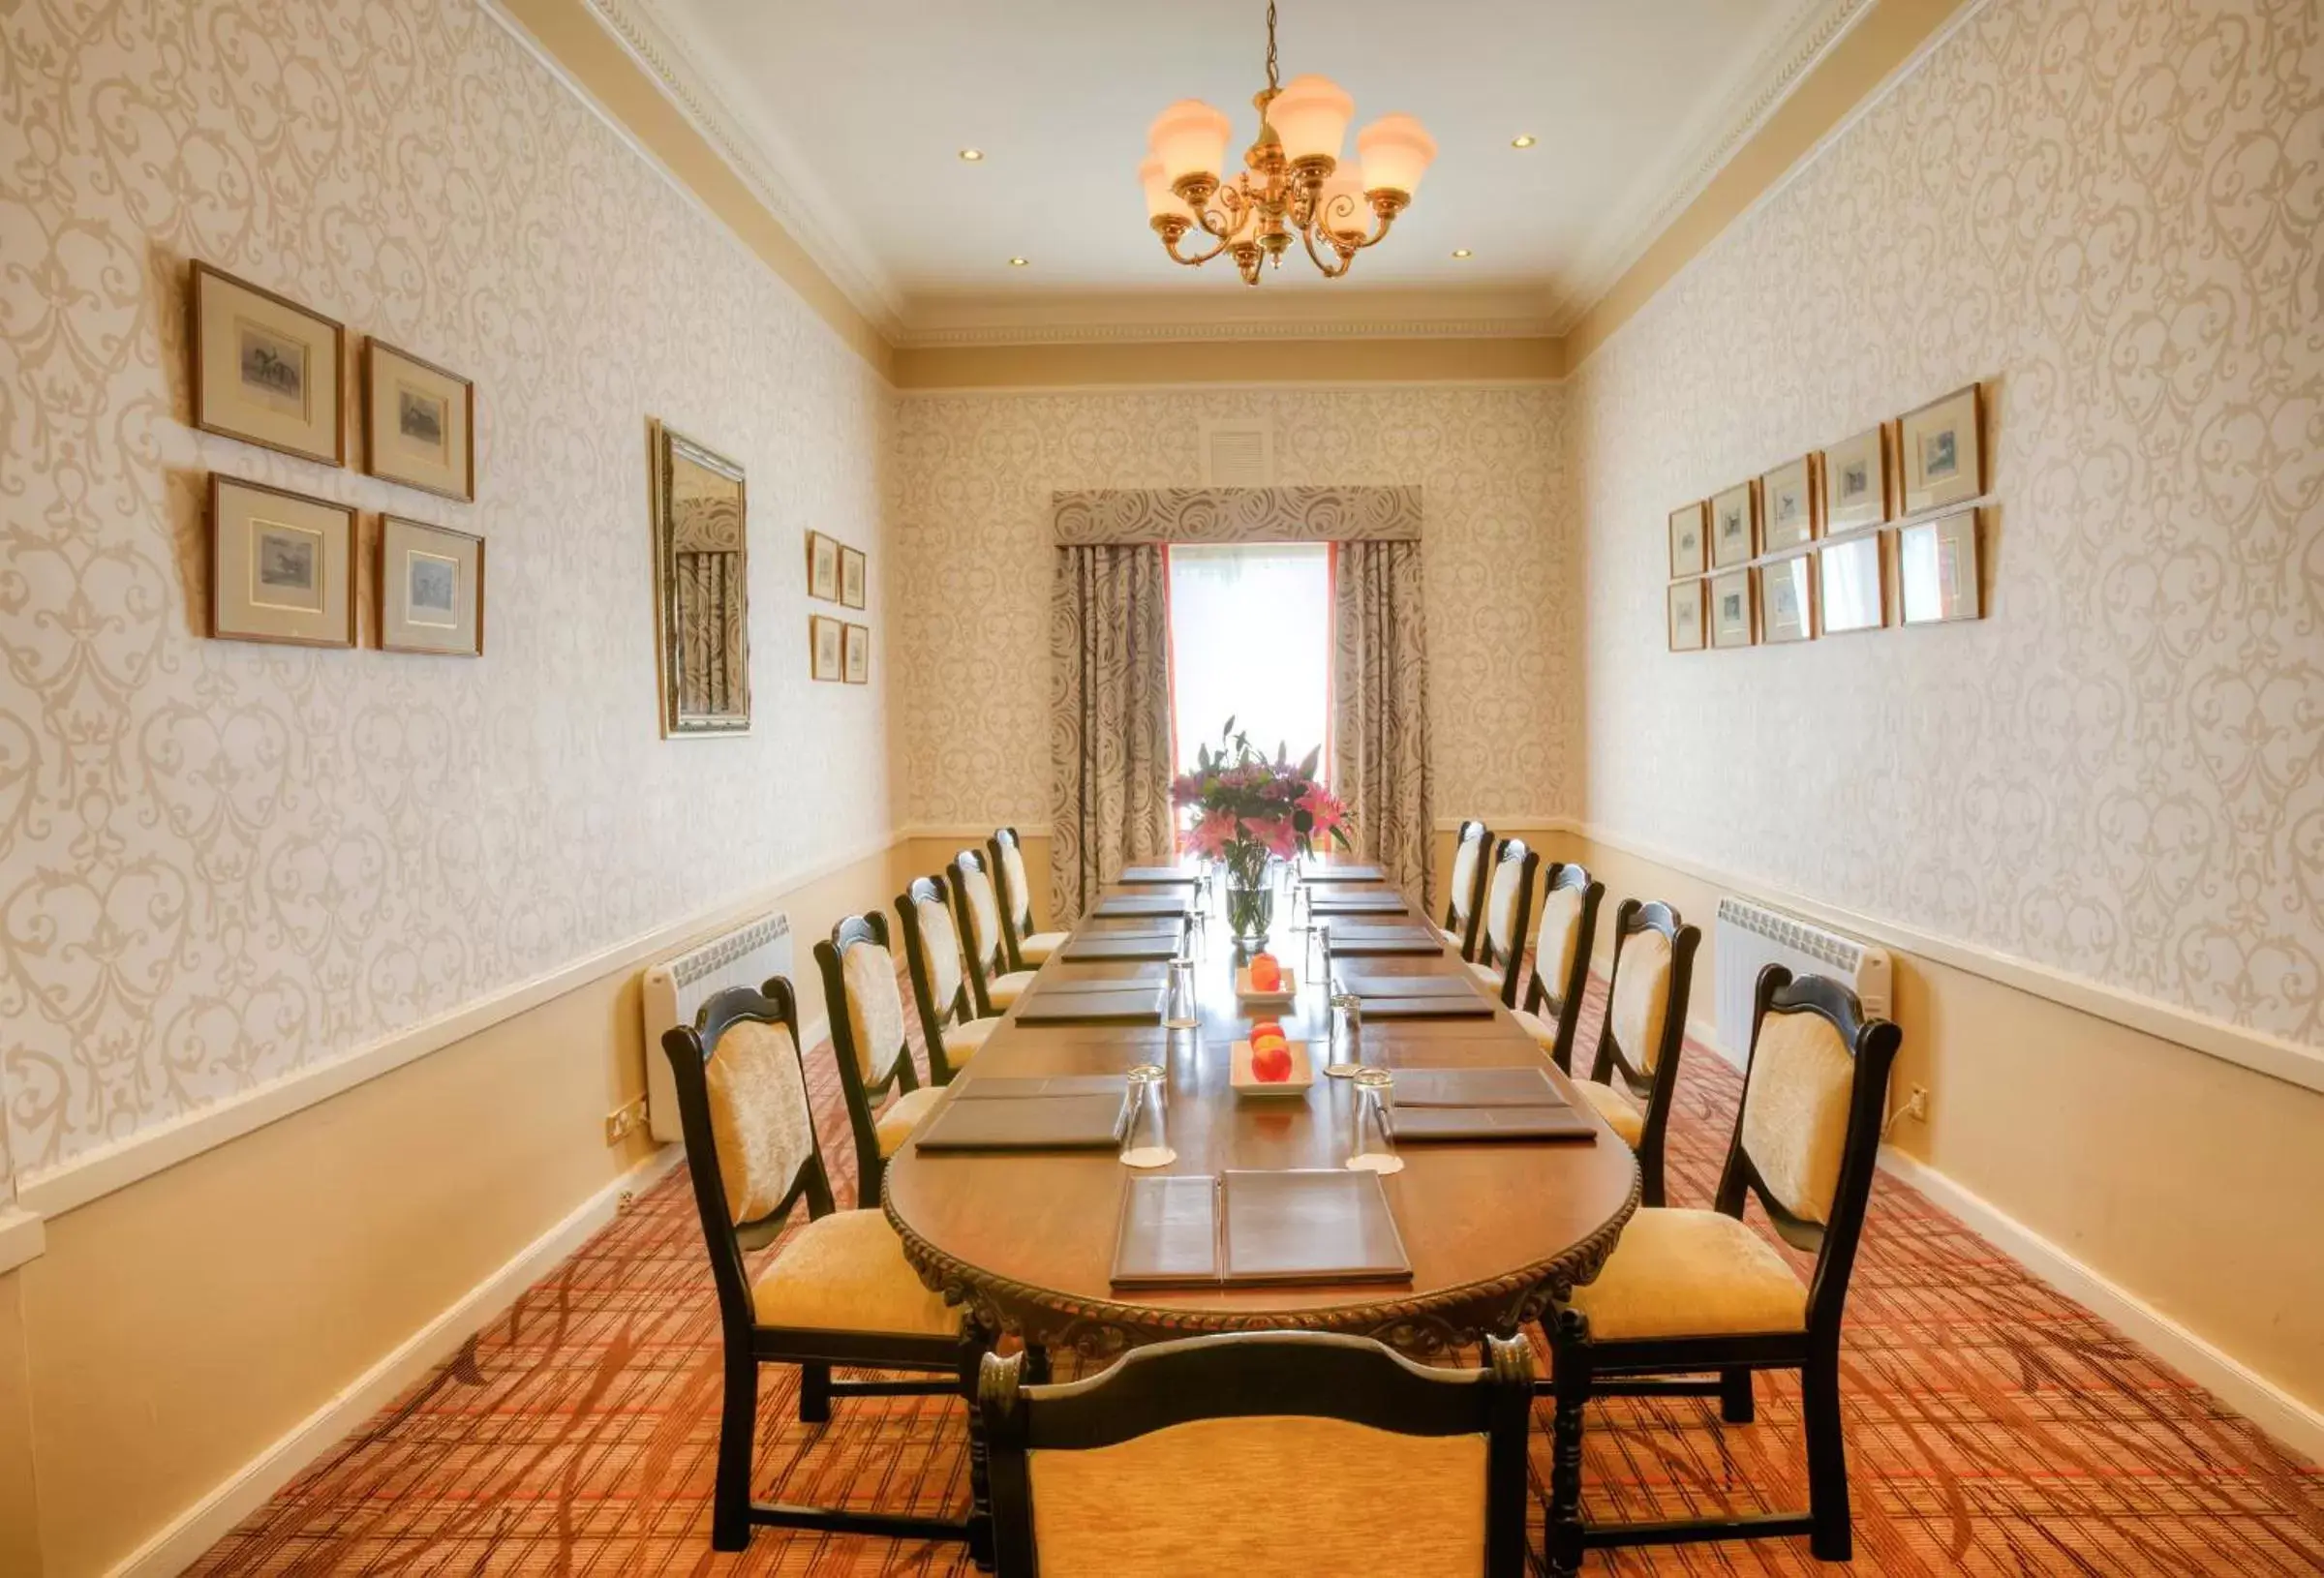 Business facilities in The Inn at Dromoland